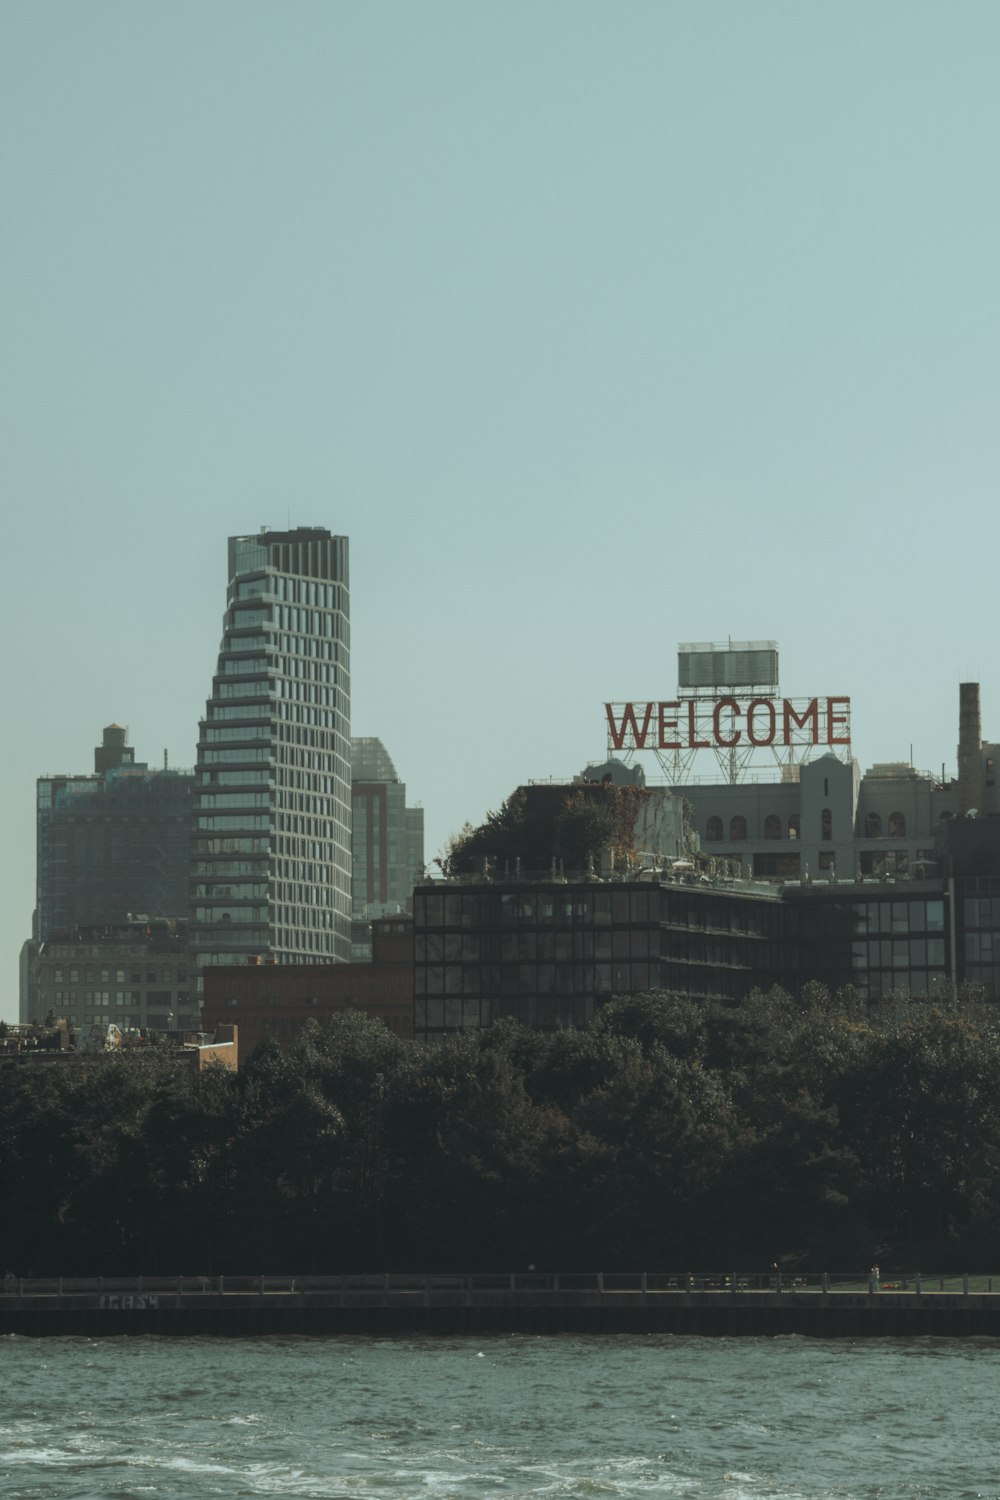 a large welcome sign on top of a building